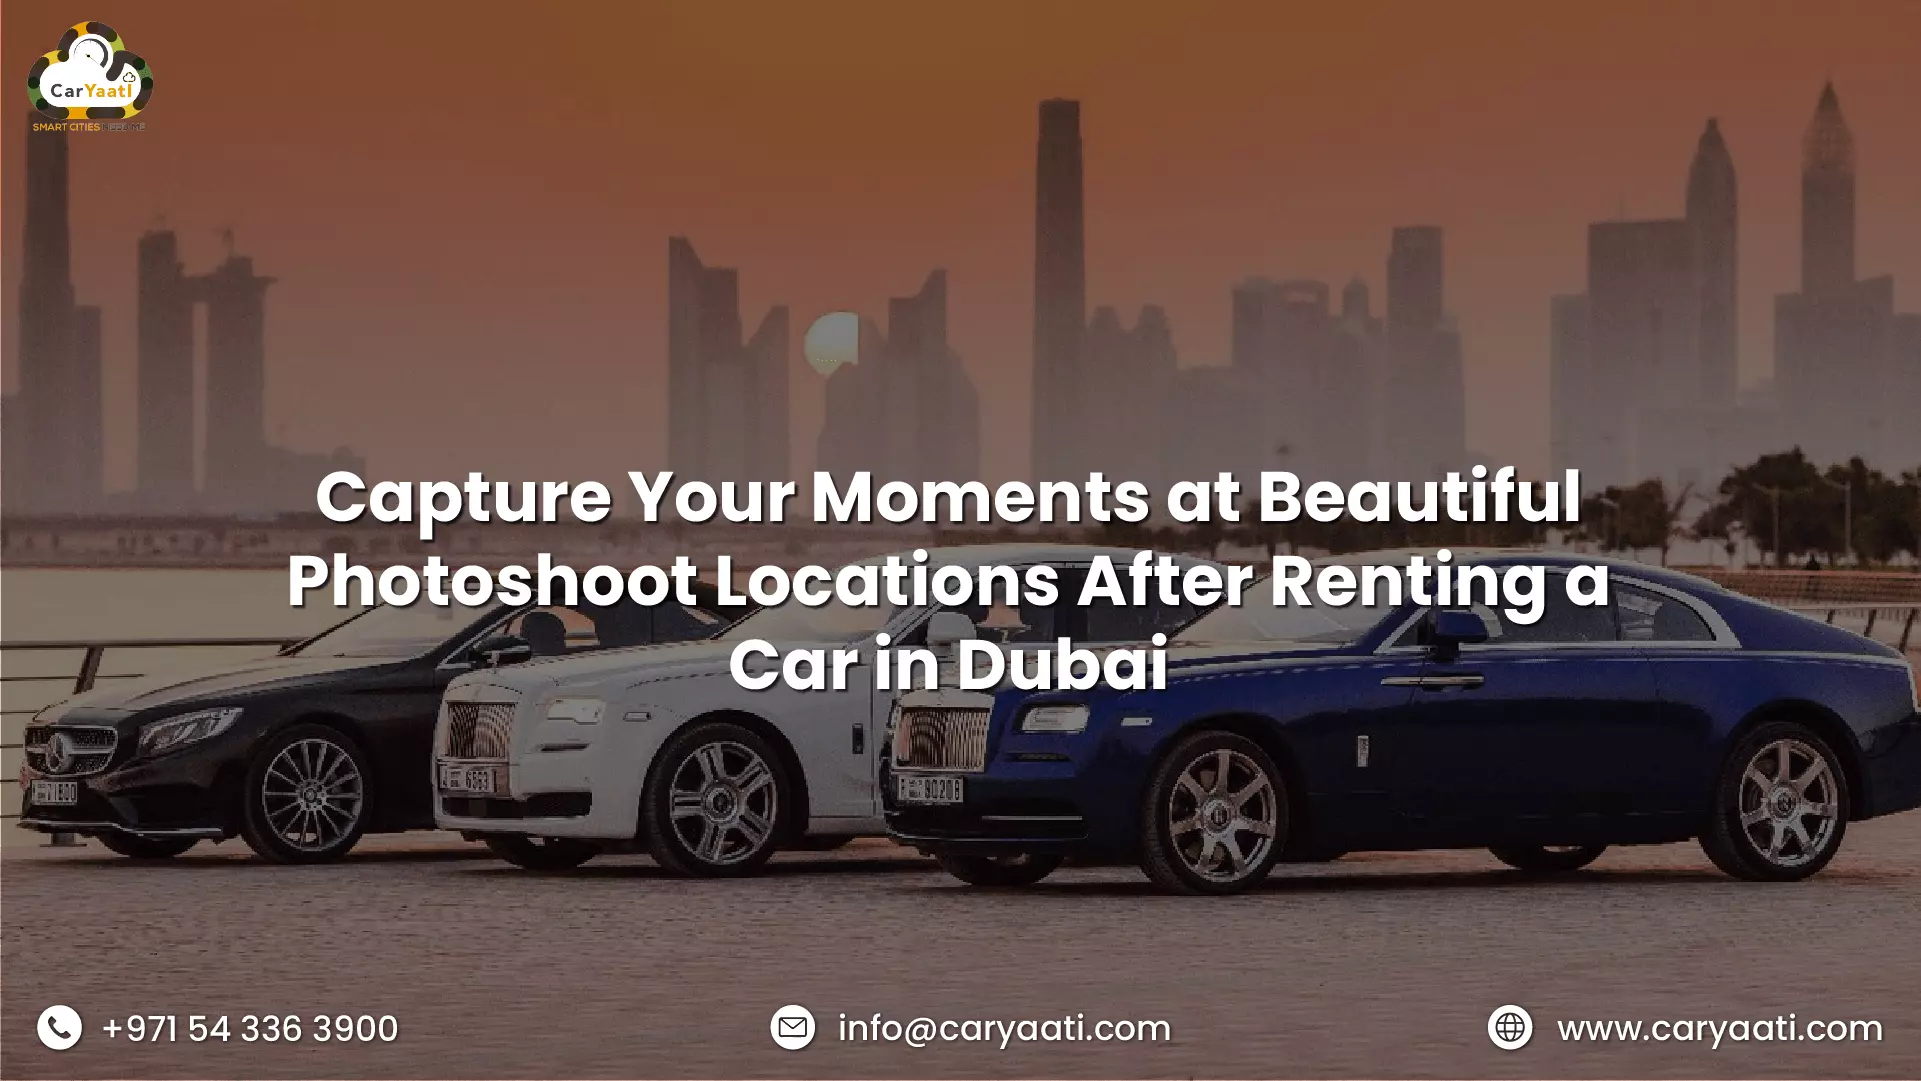 Capture Your Moments at Beautiful Photoshoot Locations After Renting a Car in Dubai